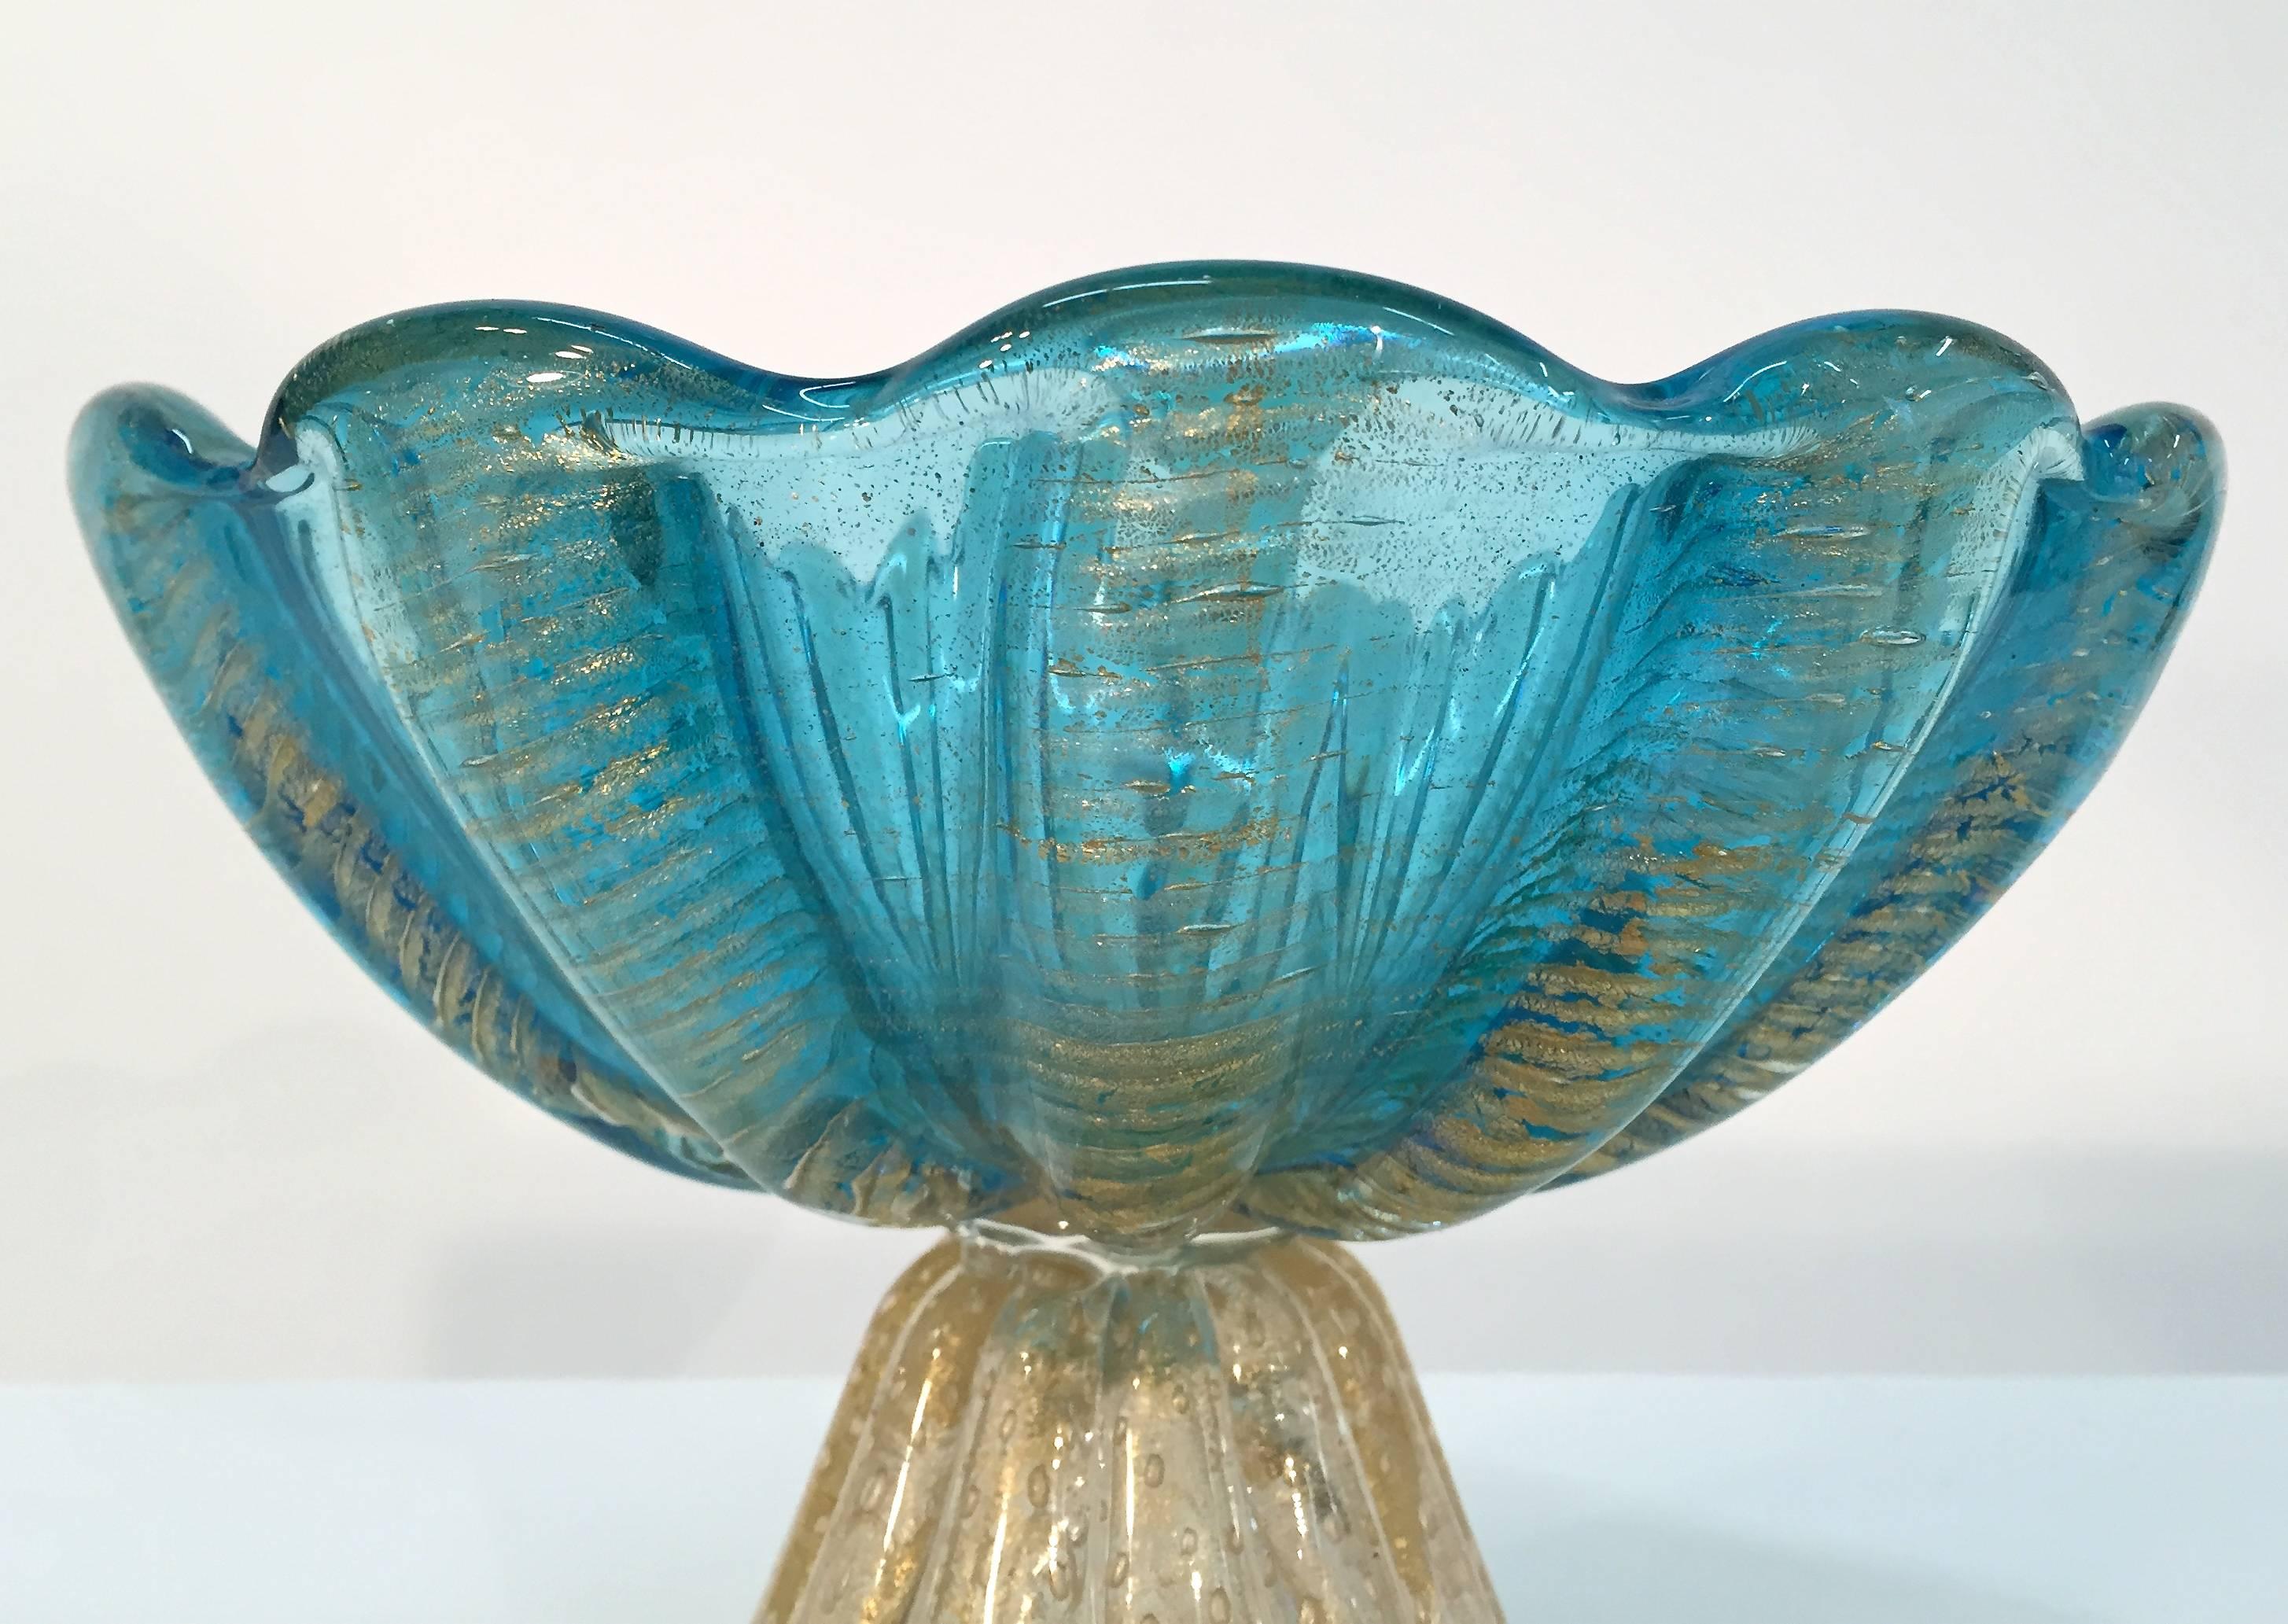 Mid-20th Century Ercole Barovier Murano Italian Art Glass Footed Compote Bowl For Sale